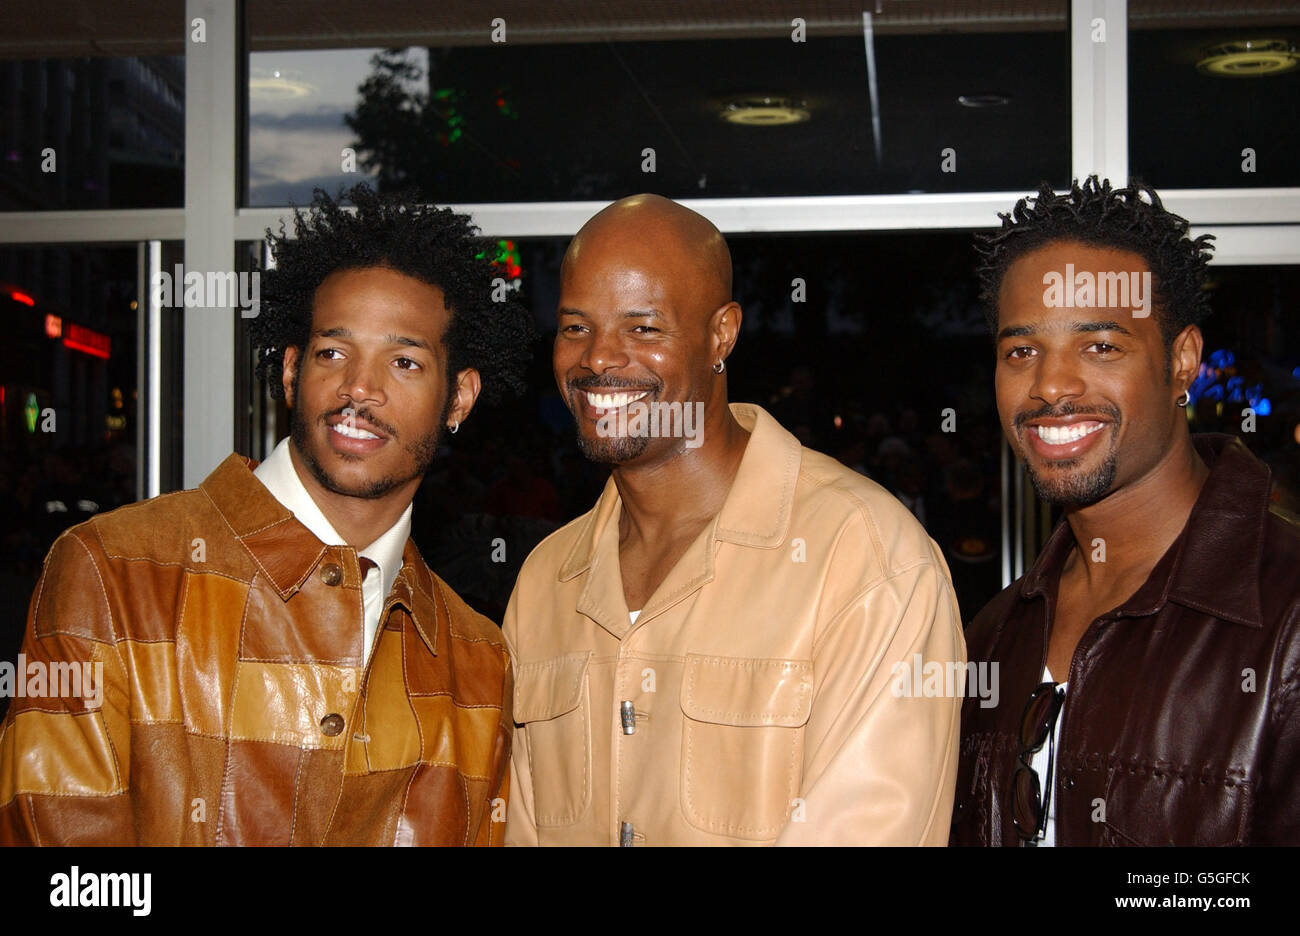 Scary Movie 2 director Keenen Ivory Wayans (centre) flanked by brothers Marlon (left) and Shawn, arriving at the Odeon West End, in London's Leicester Square for the UK Premiere of Scary Movie 2. Stock Photo